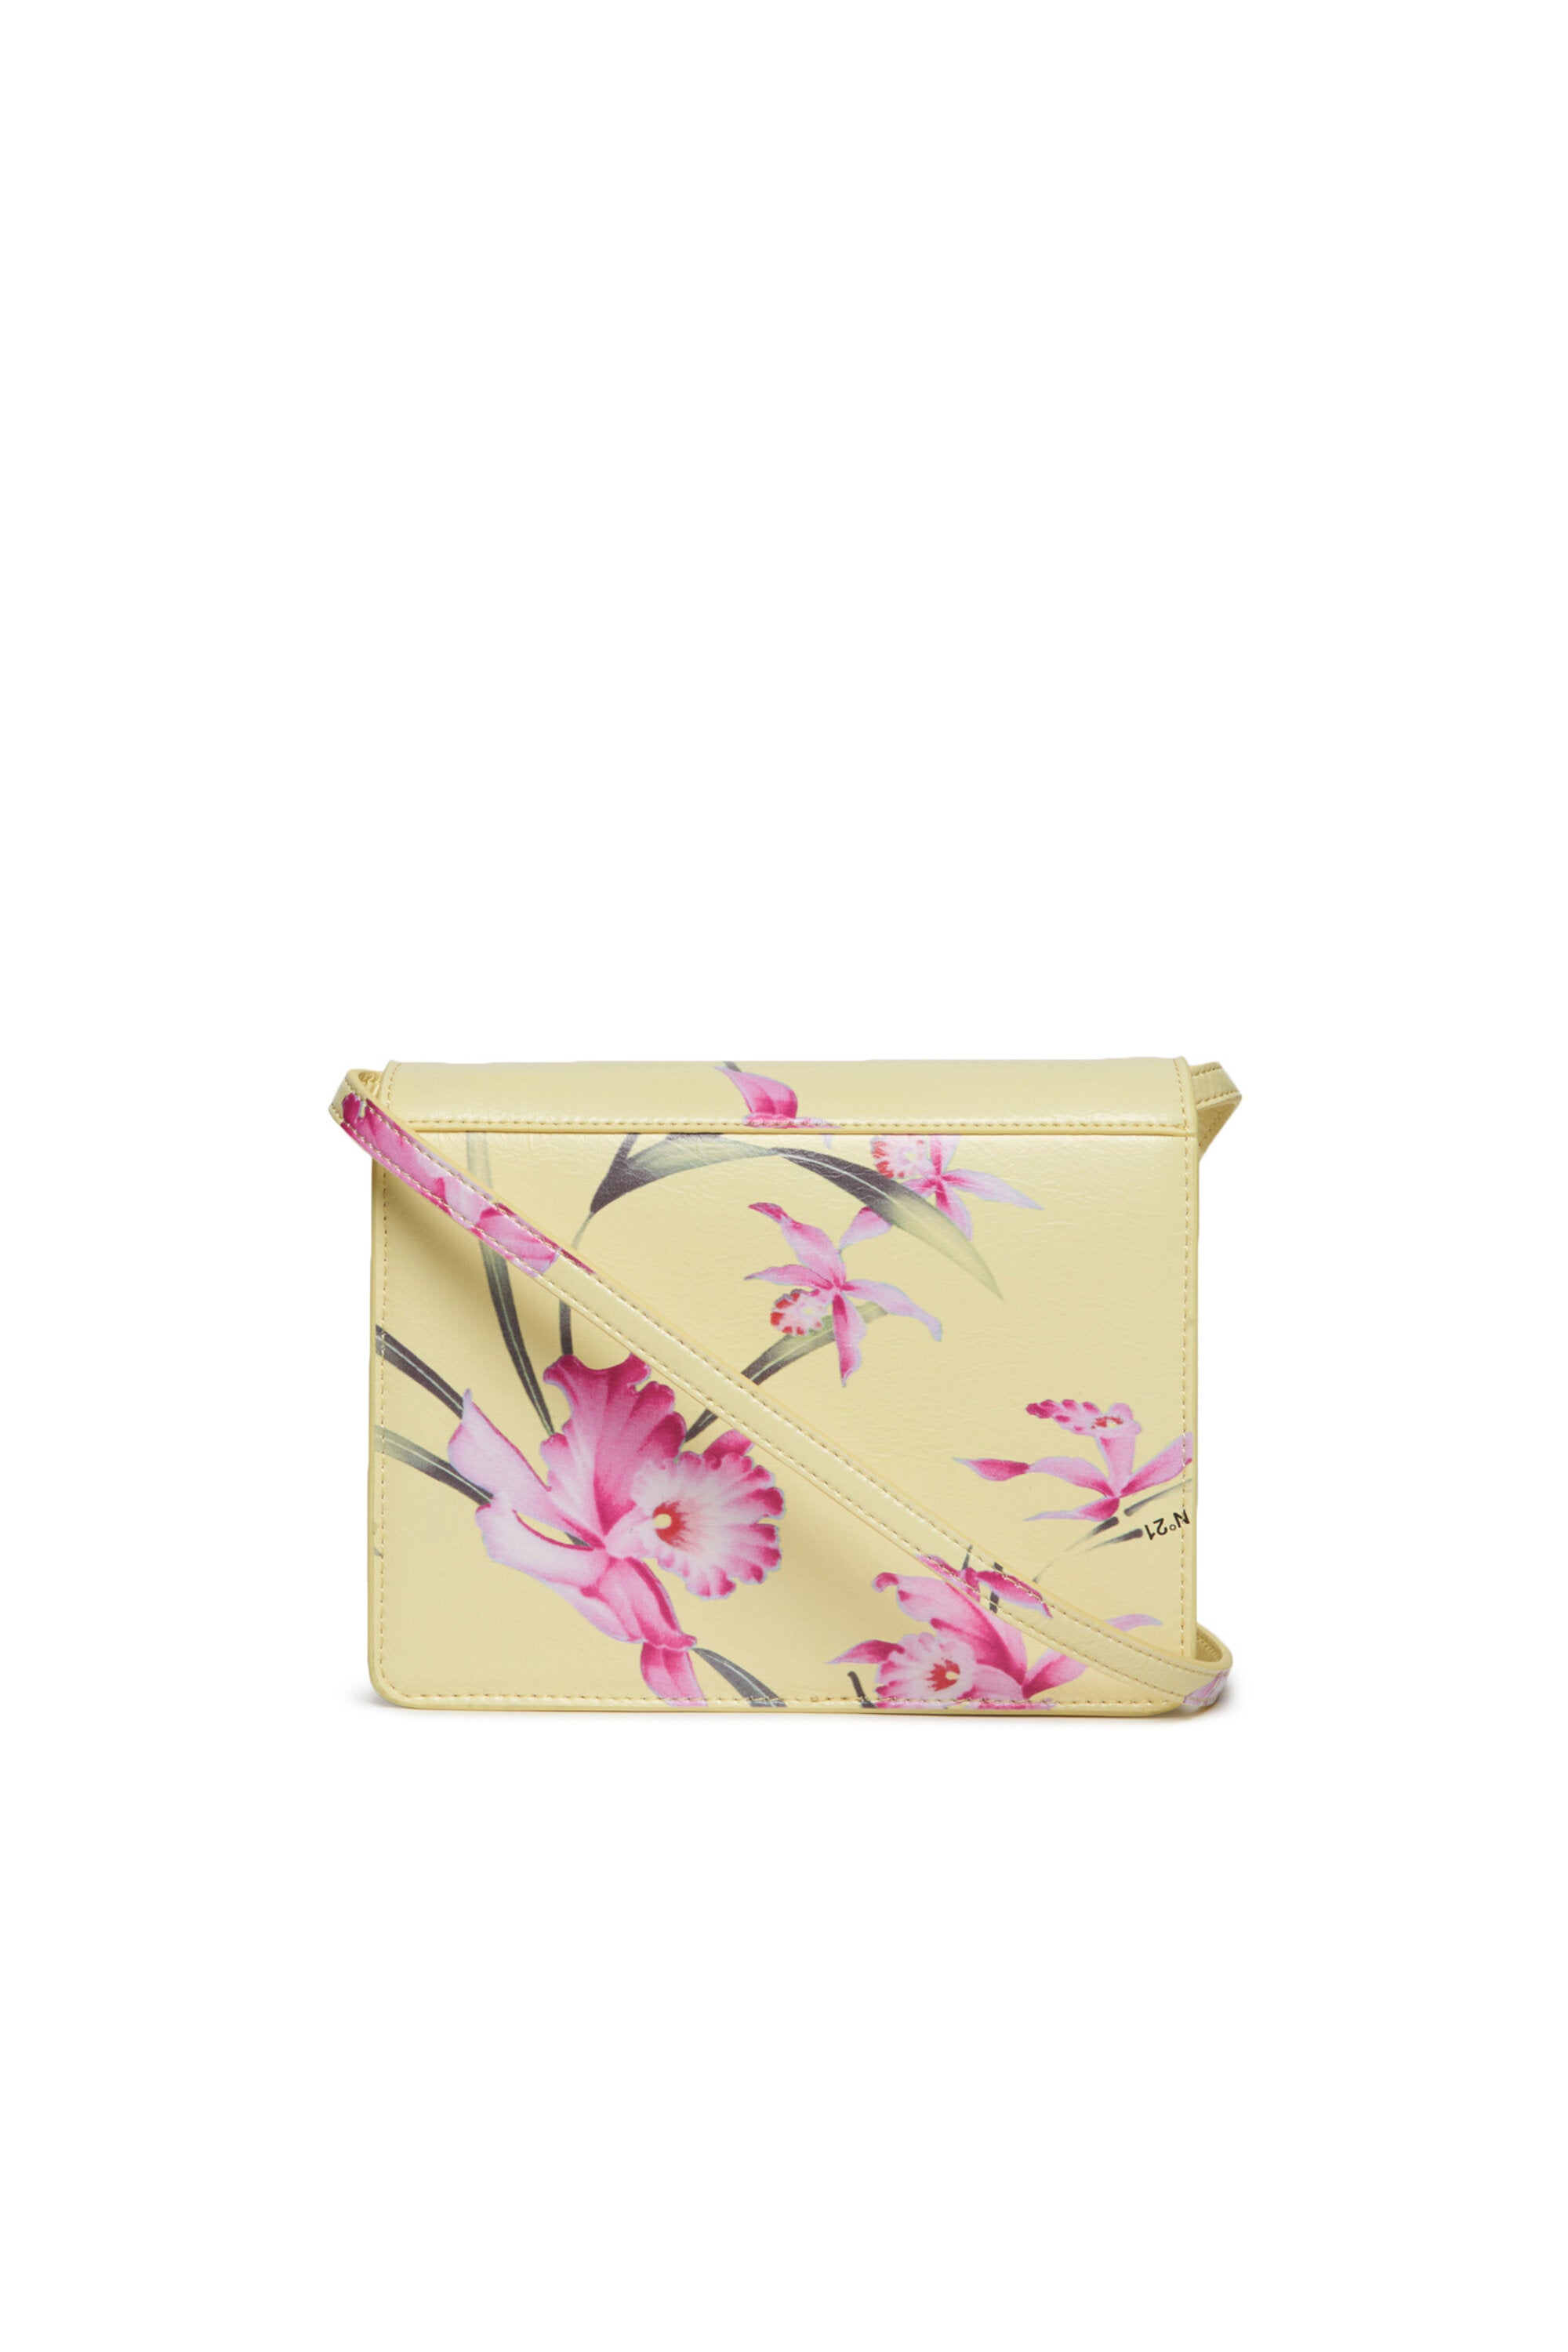 Yellow flap bag in leatherette with shoulder strap and floral print